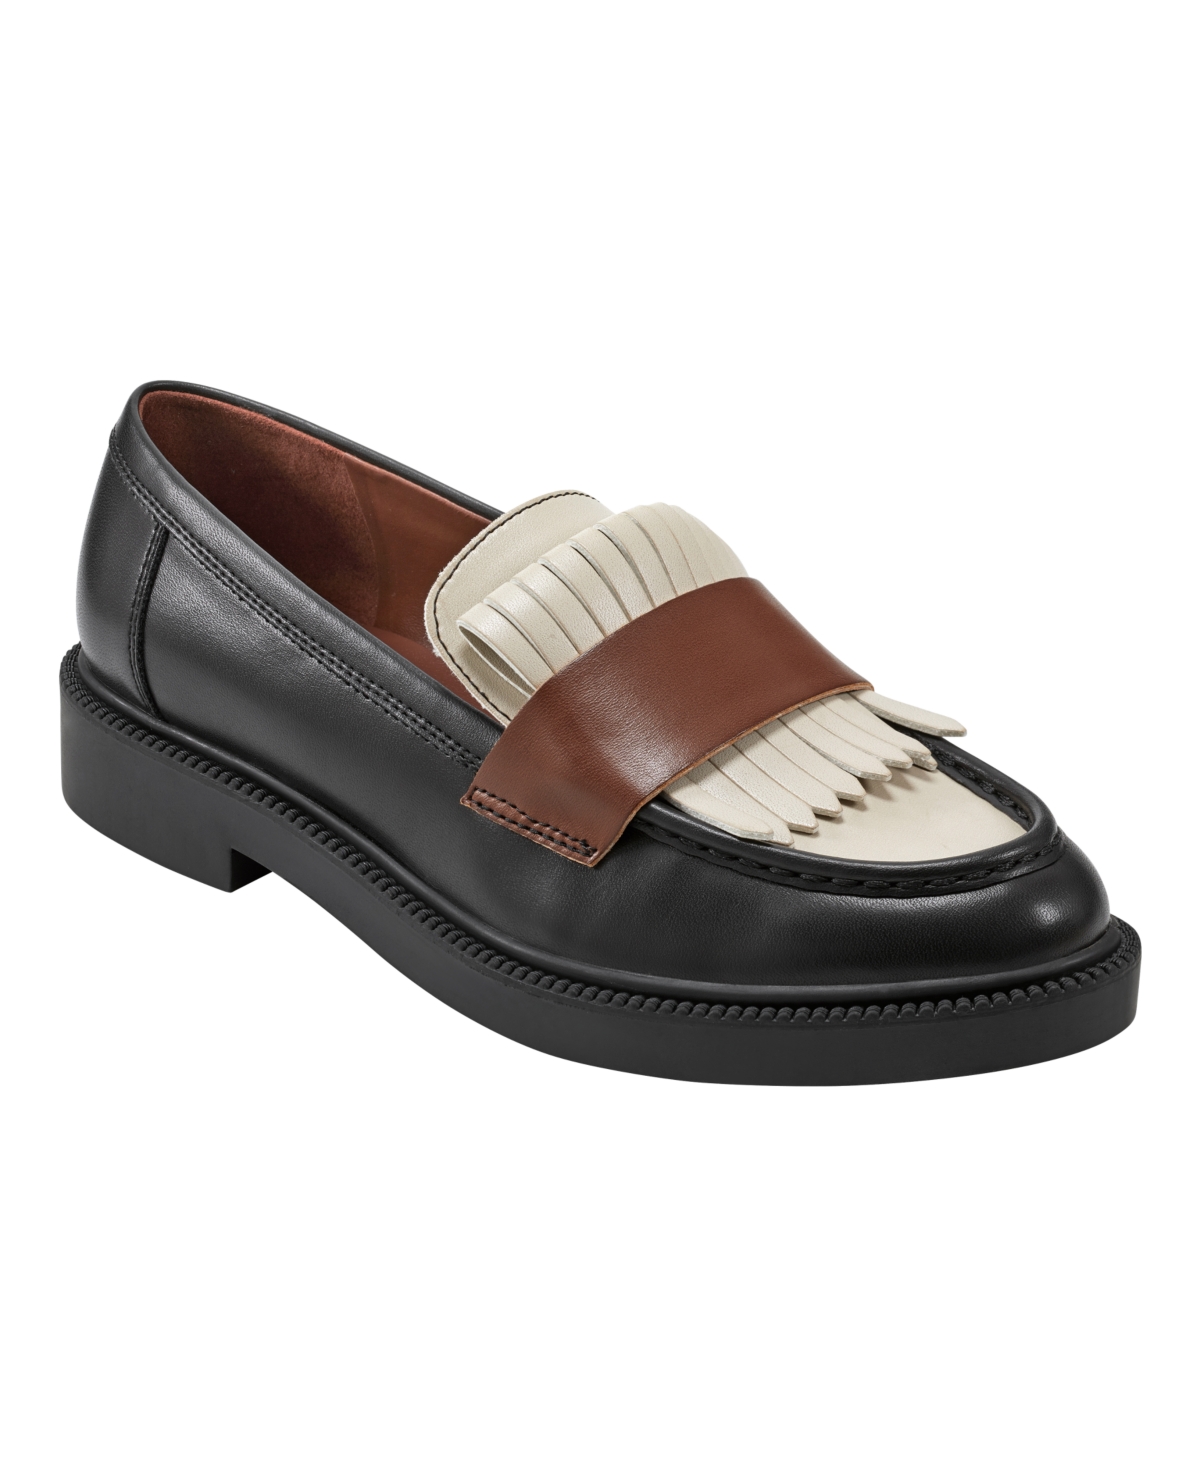 Marc Fisher Women's Calixy Almond Toe Slip-on Casual Loafers In Black,creme,brown